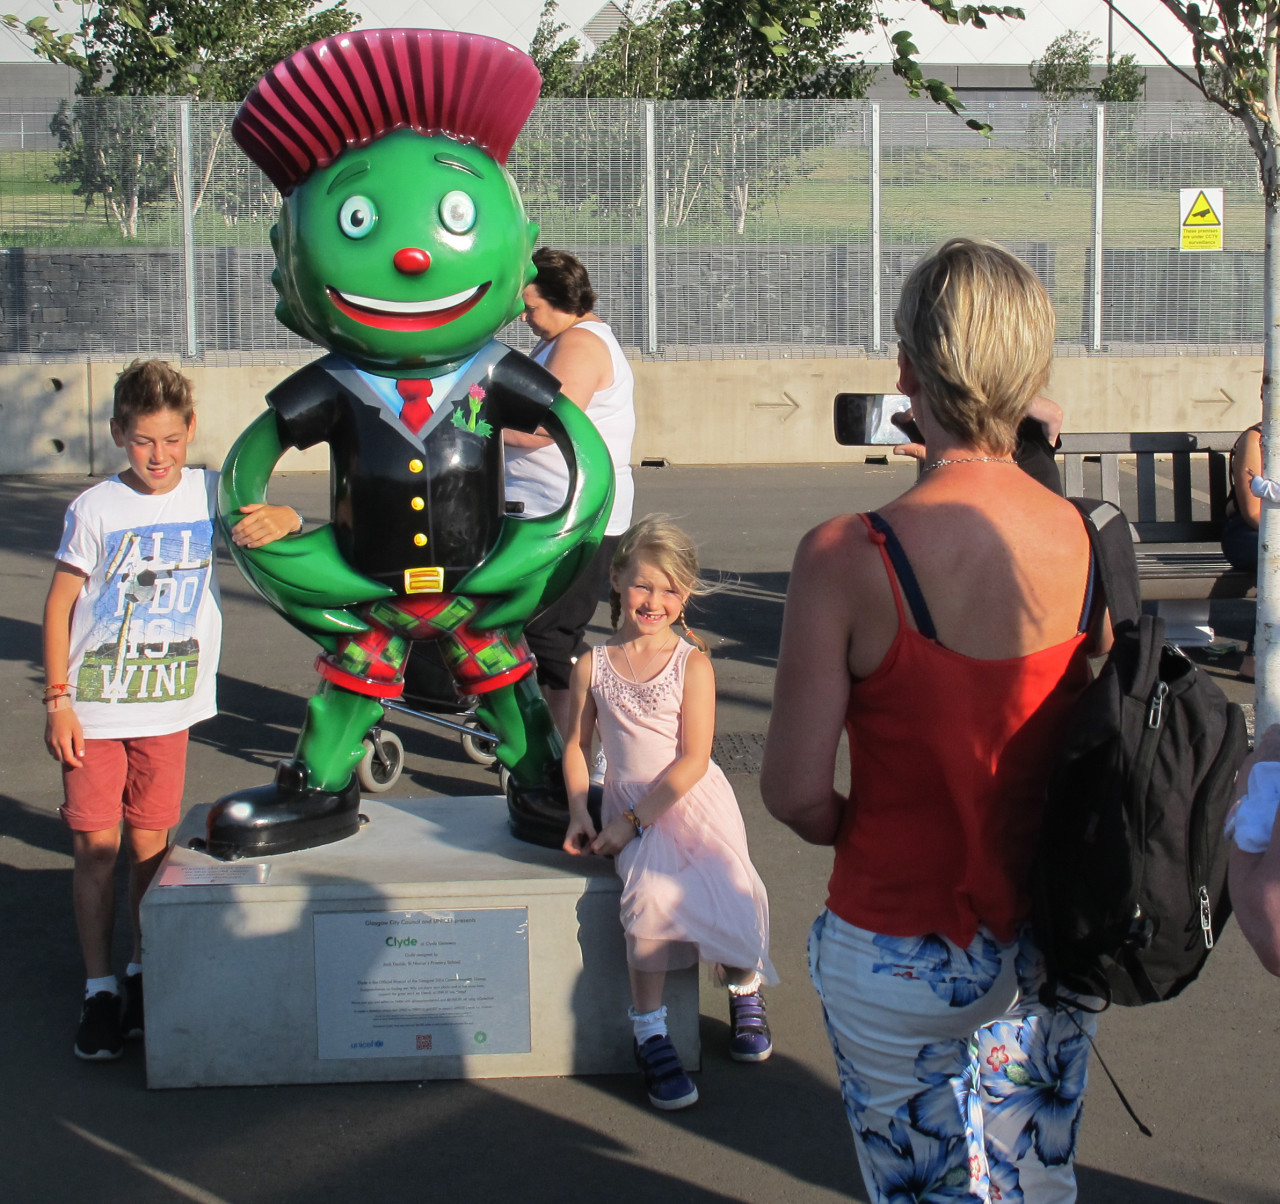 It wouldn't be an international sporting event without an unusual mascot. This is Clyde, named after the River Clyde, which runs through Glasgow. (Doug Tribou/Only A Game)